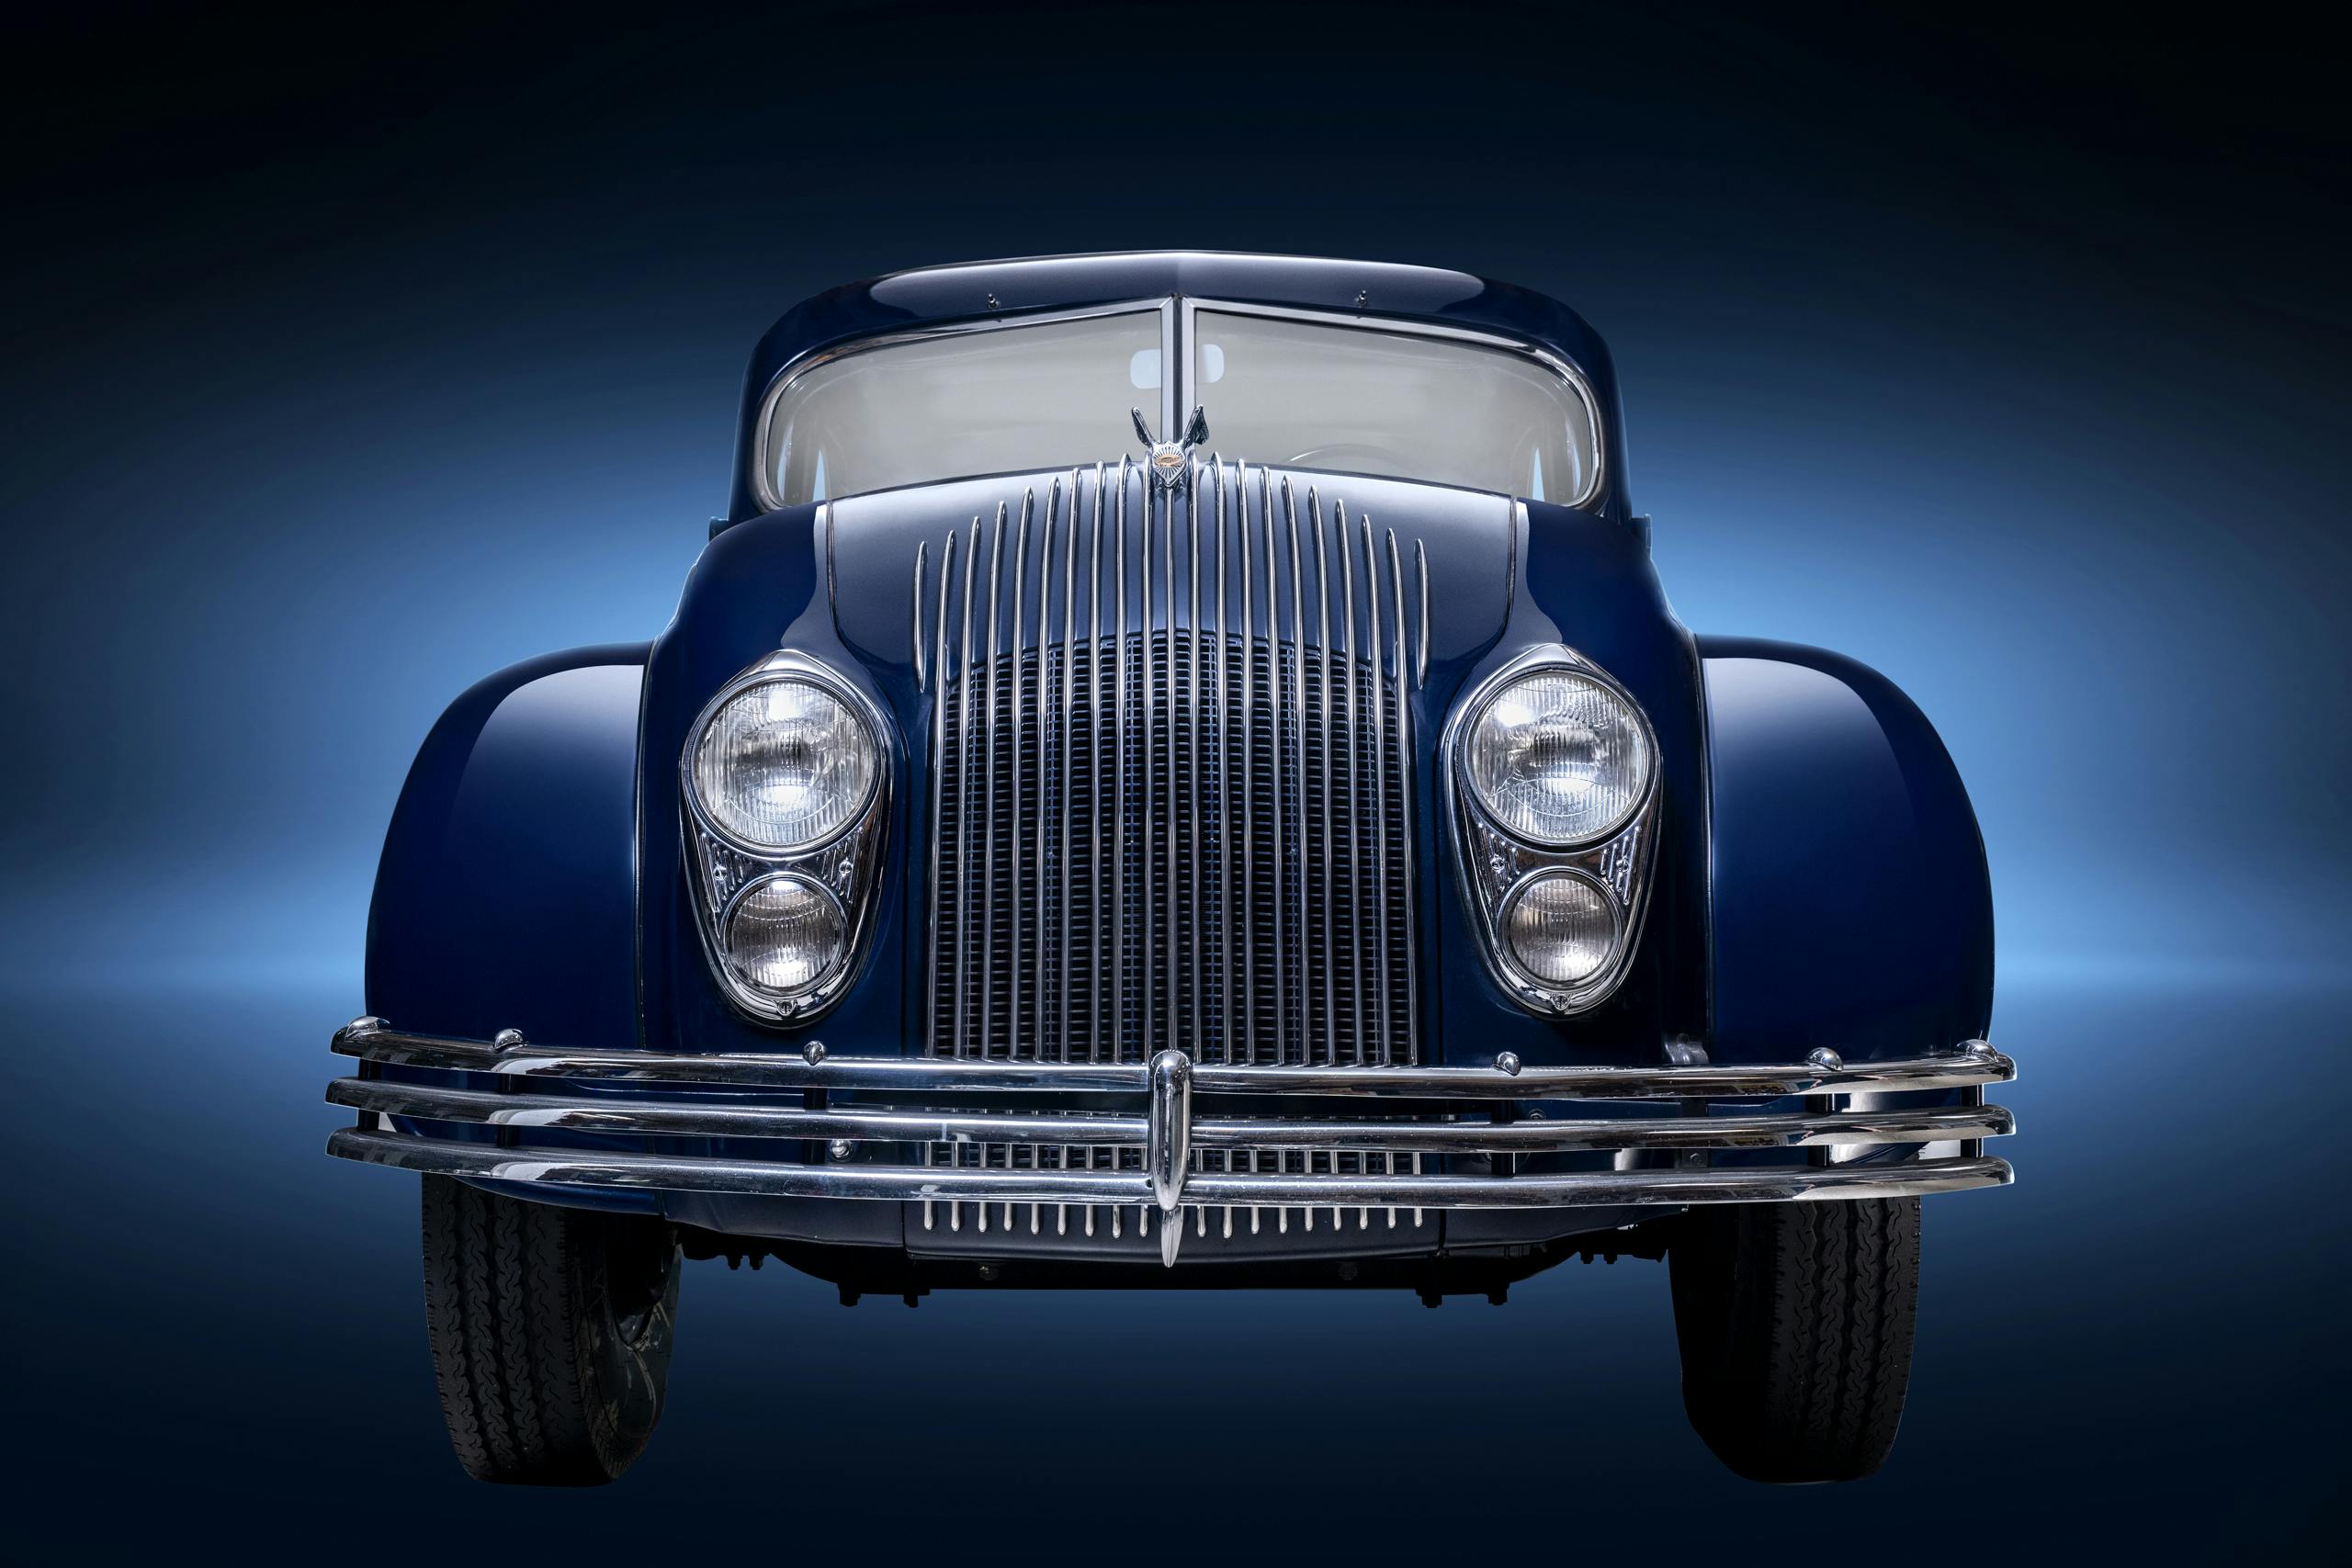 1934 Chrysler Airflow: The car of the future that arrived a little ...